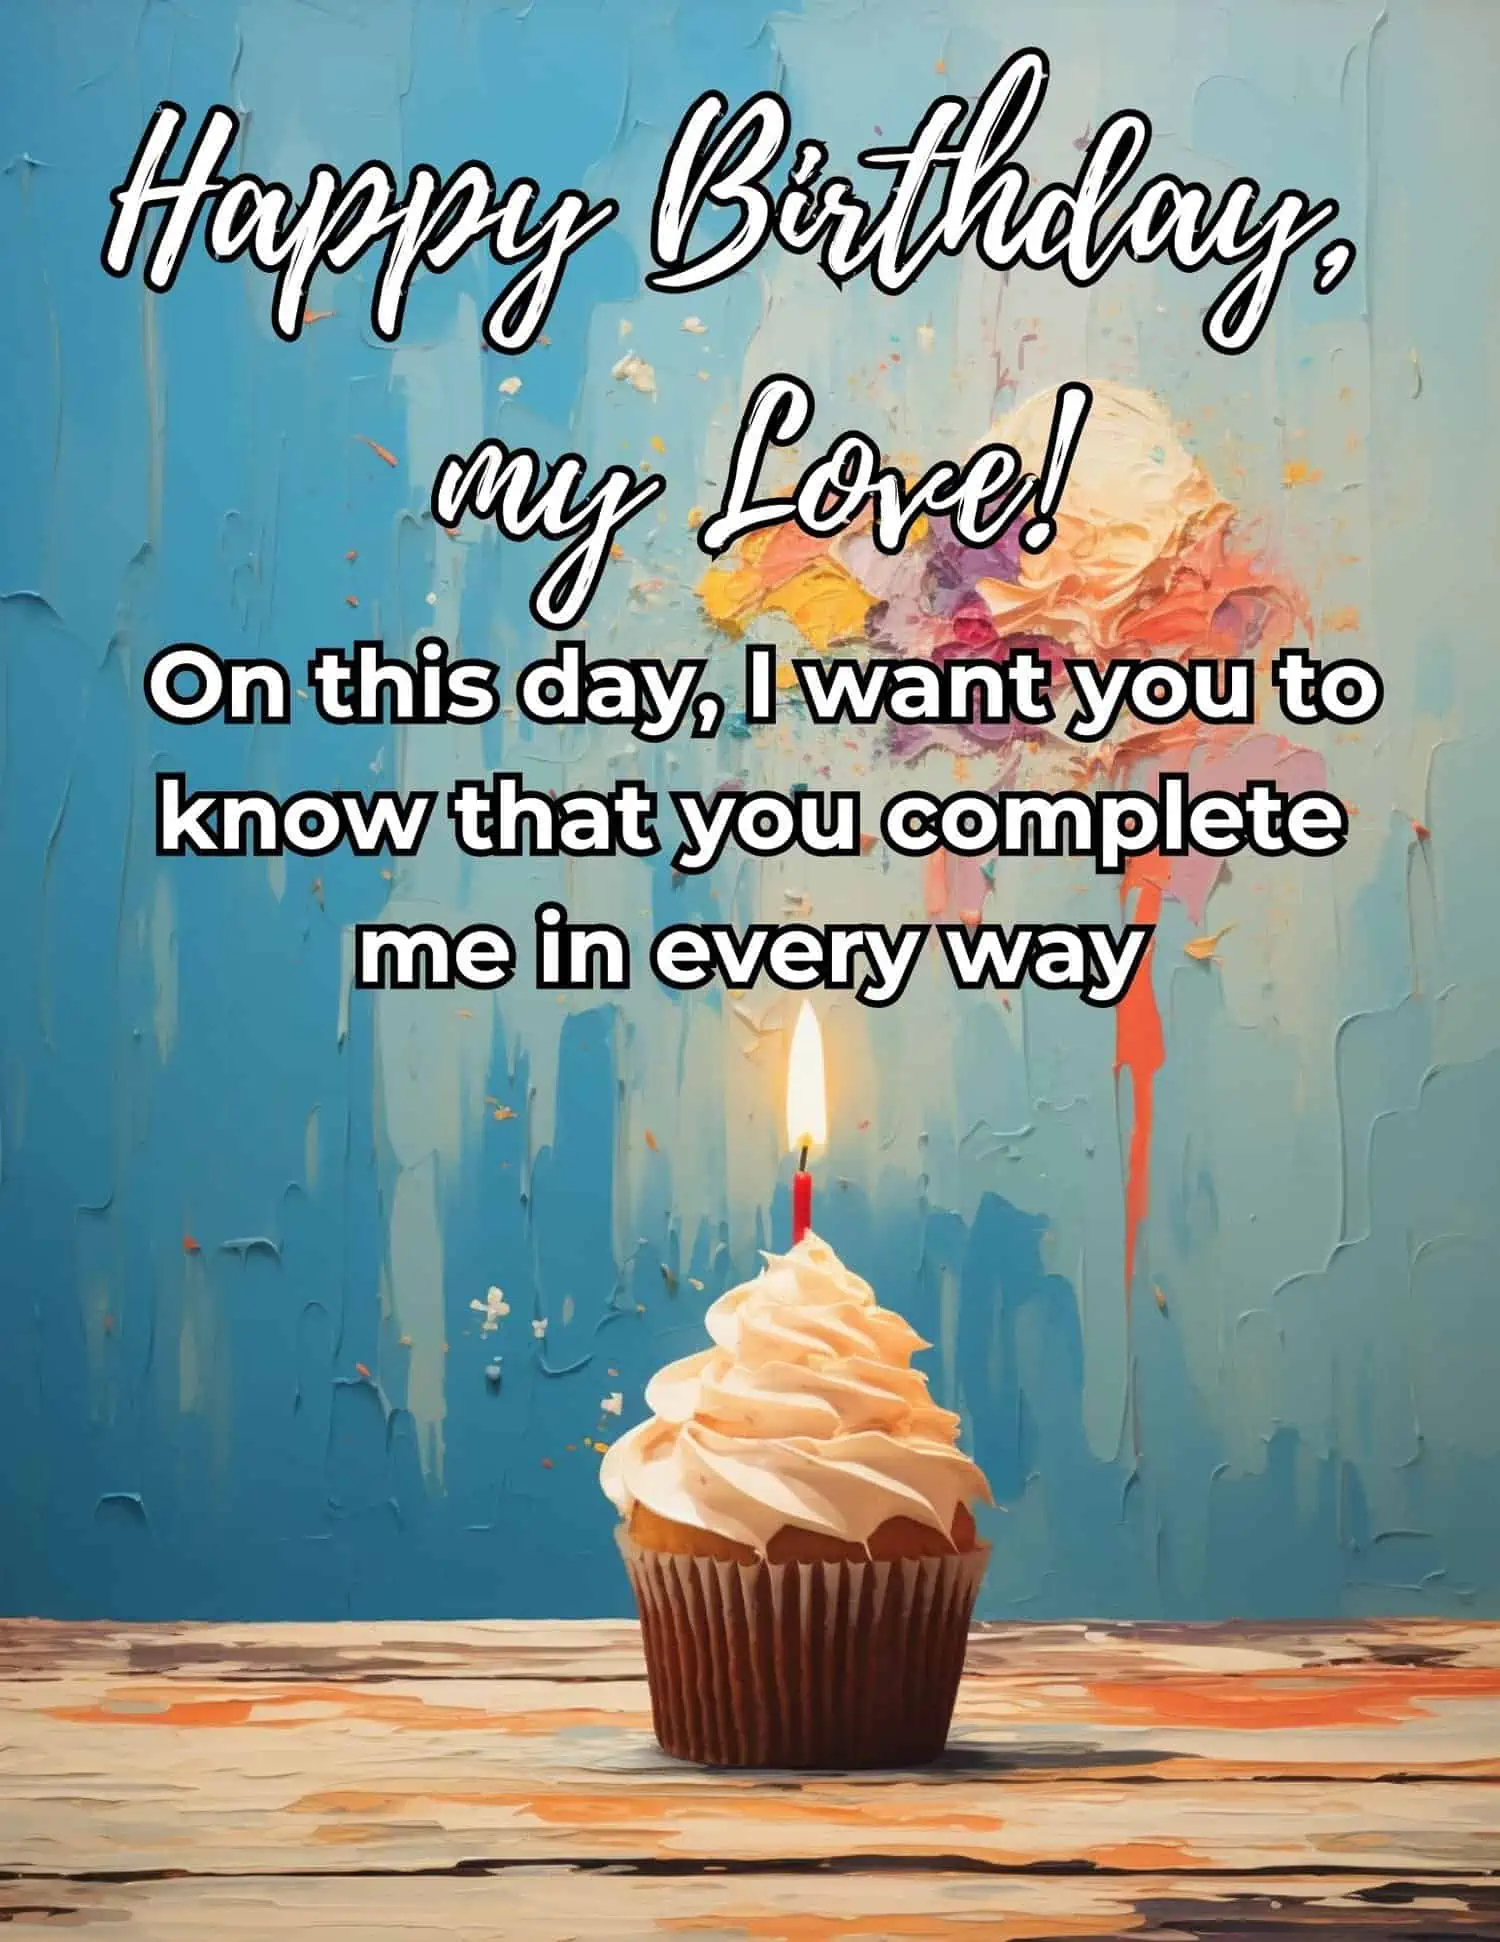 Happy Birthday My Love On This Day I Want You To Know That You Complete Me In Everyway